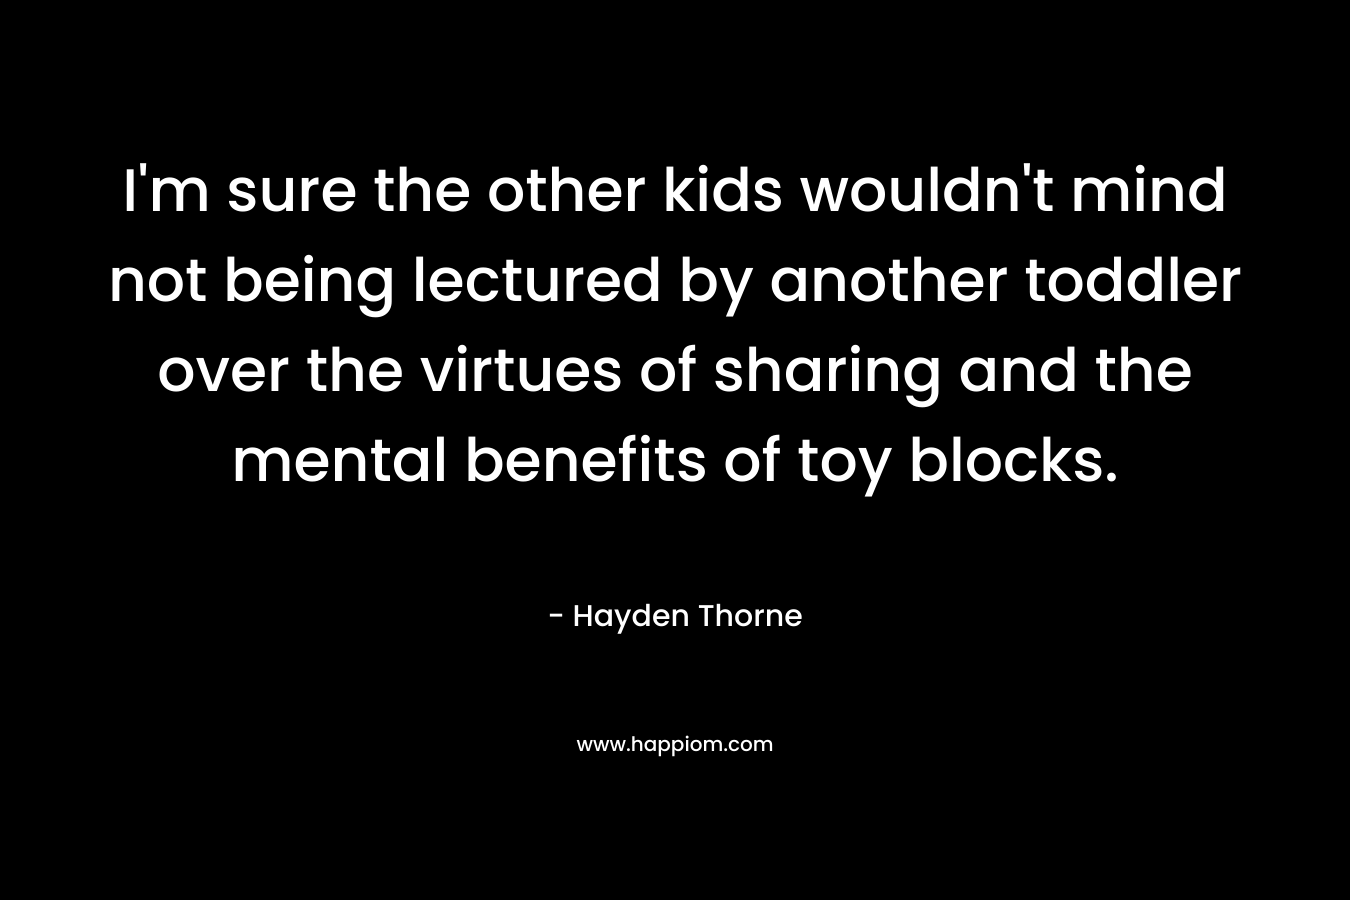 I’m sure the other kids wouldn’t mind not being lectured by another toddler over the virtues of sharing and the mental benefits of toy blocks. – Hayden Thorne